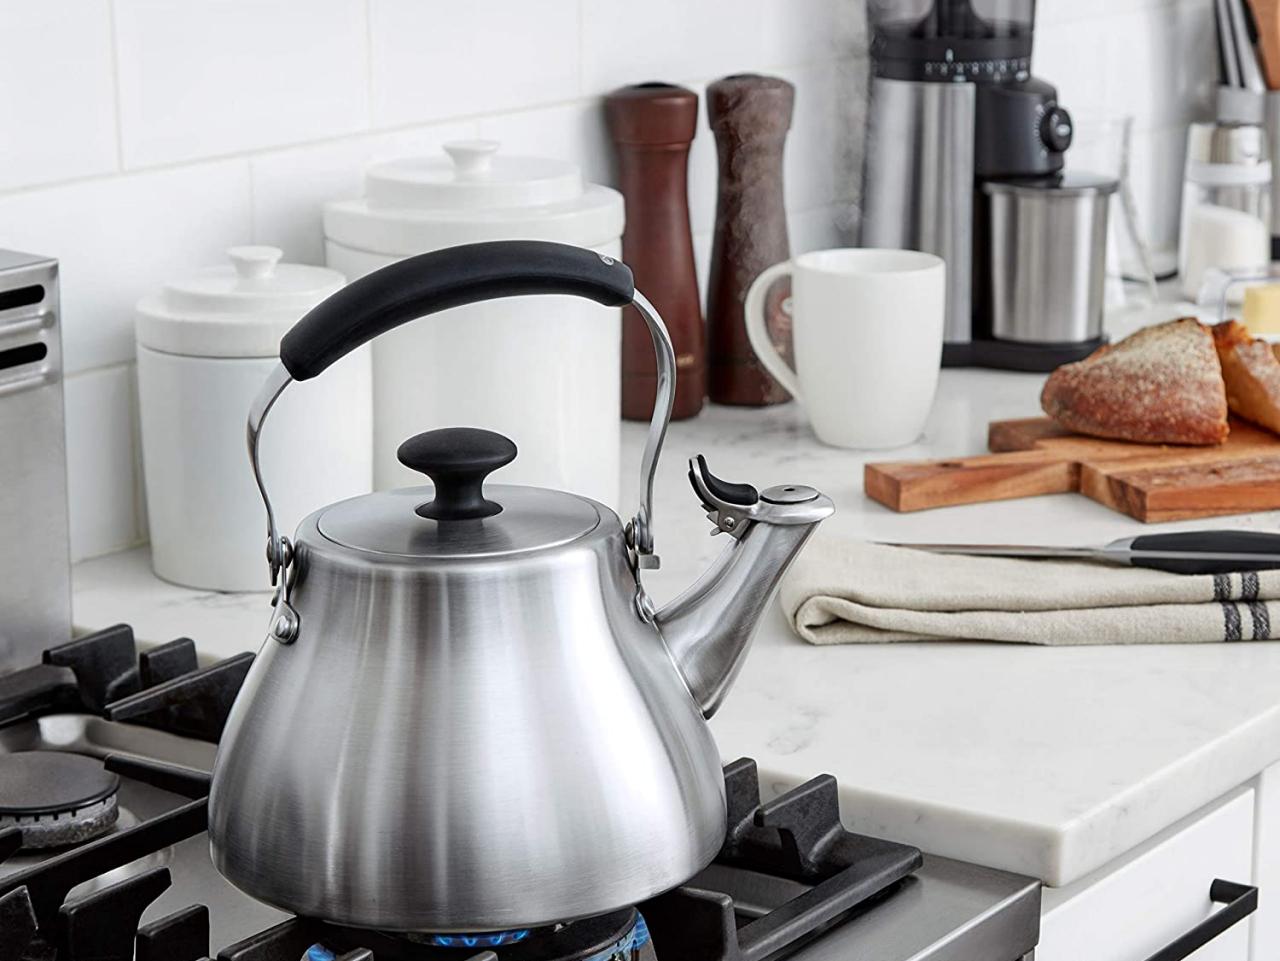 https://food.fnr.sndimg.com/content/dam/images/food/products/2022/1/21/rx_oxo-brew-classic-tea-kettle.jpeg.rend.hgtvcom.1280.960.suffix/1642794251429.jpeg